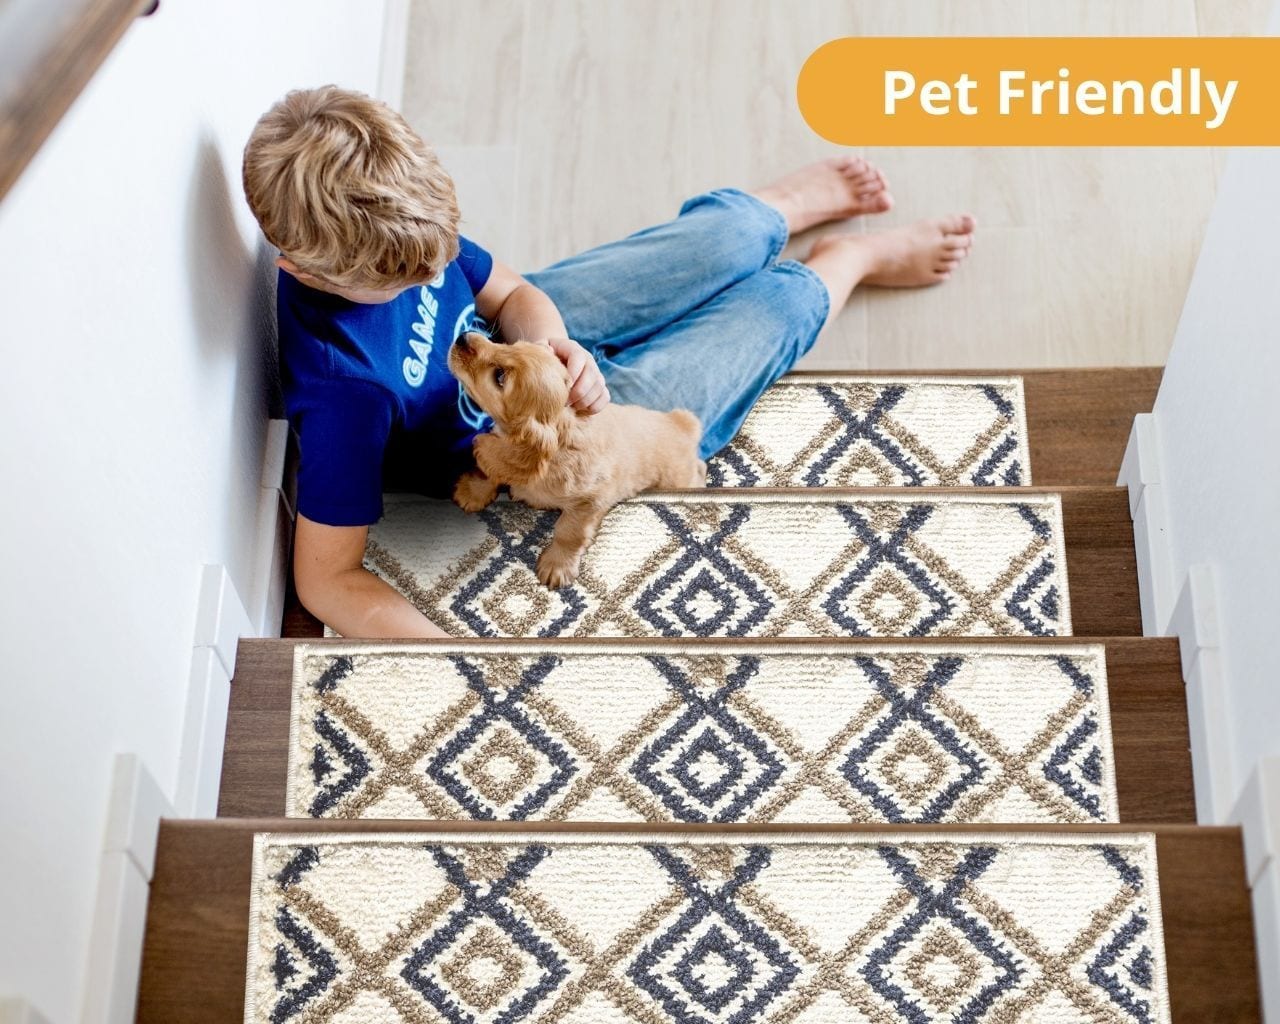 With Interesting Outdoor Doormats Washable For Indoor Floor Use Entrance  And Waterproof And And Mats Insoles Patterns Doors Sayings Outdoor Home  Decor